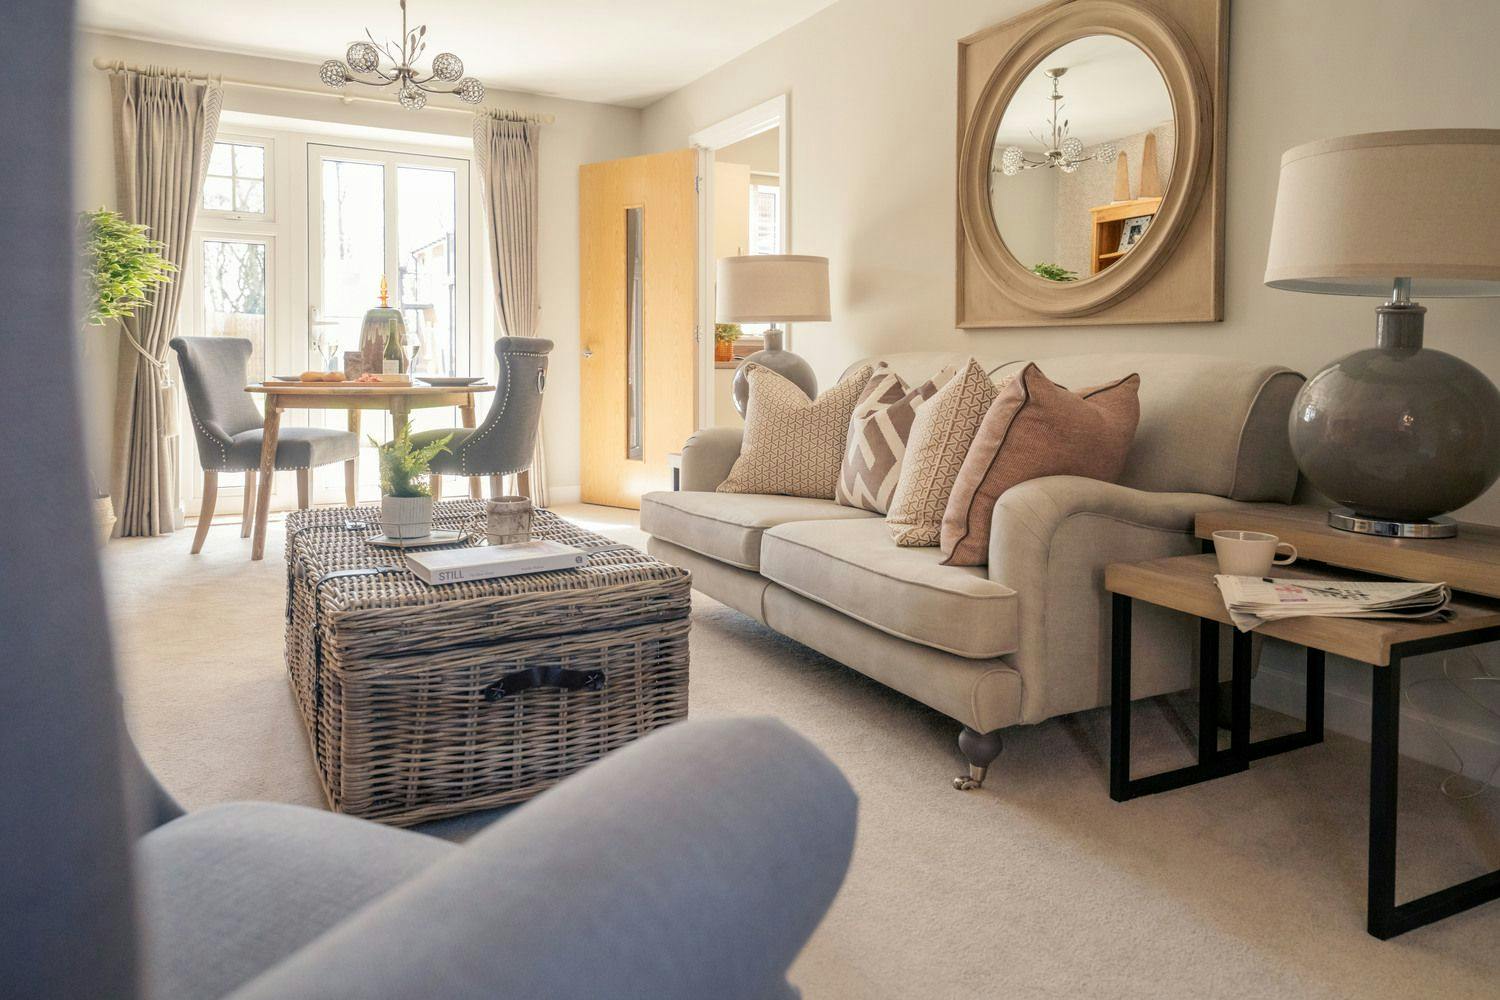 Living Room at Rogerson Court Retirement Development in Pocklington, East Riding of Yorkshire